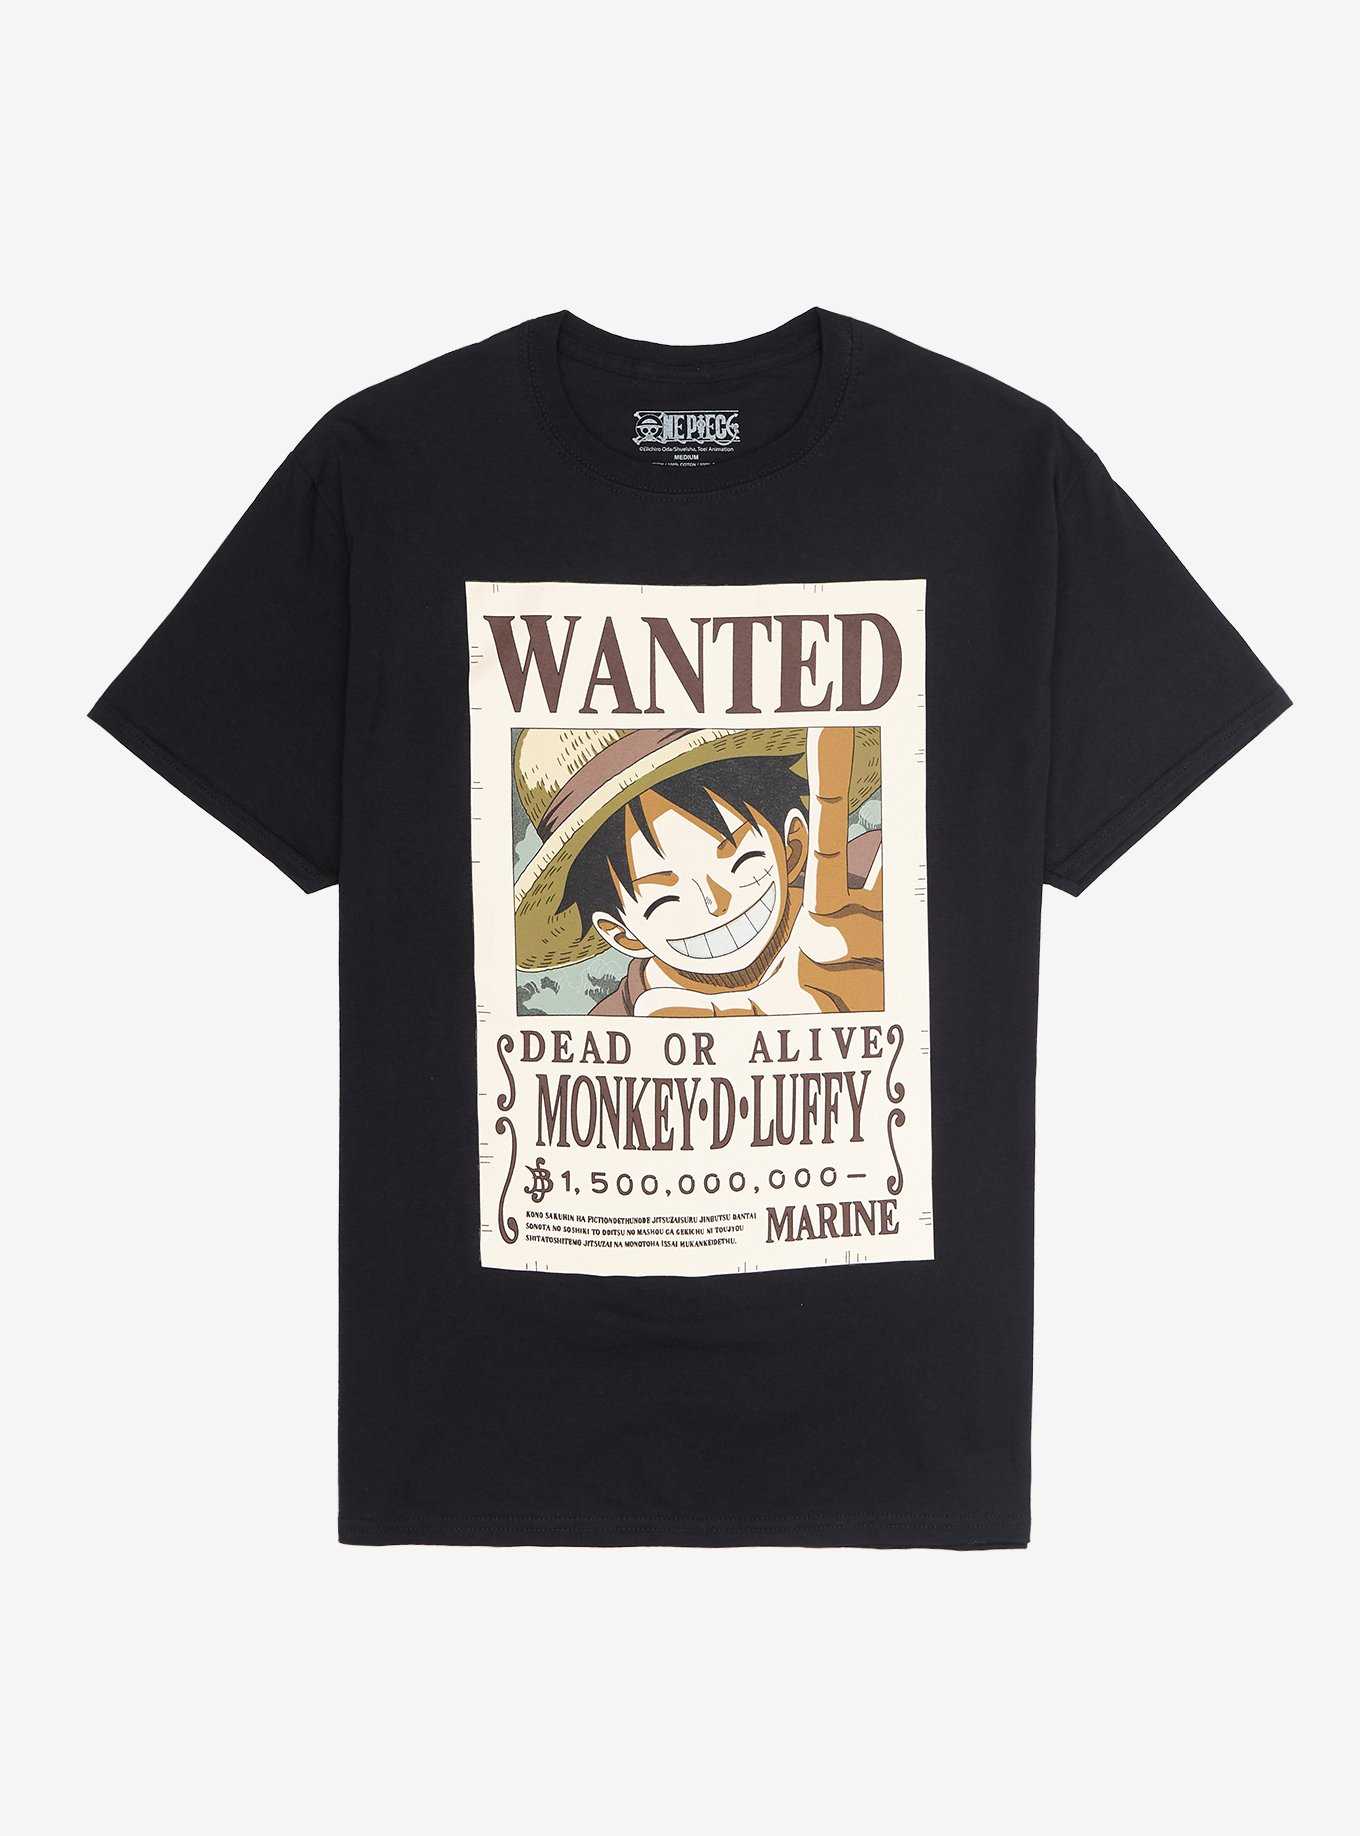 One Piece T-shirts and Apparel